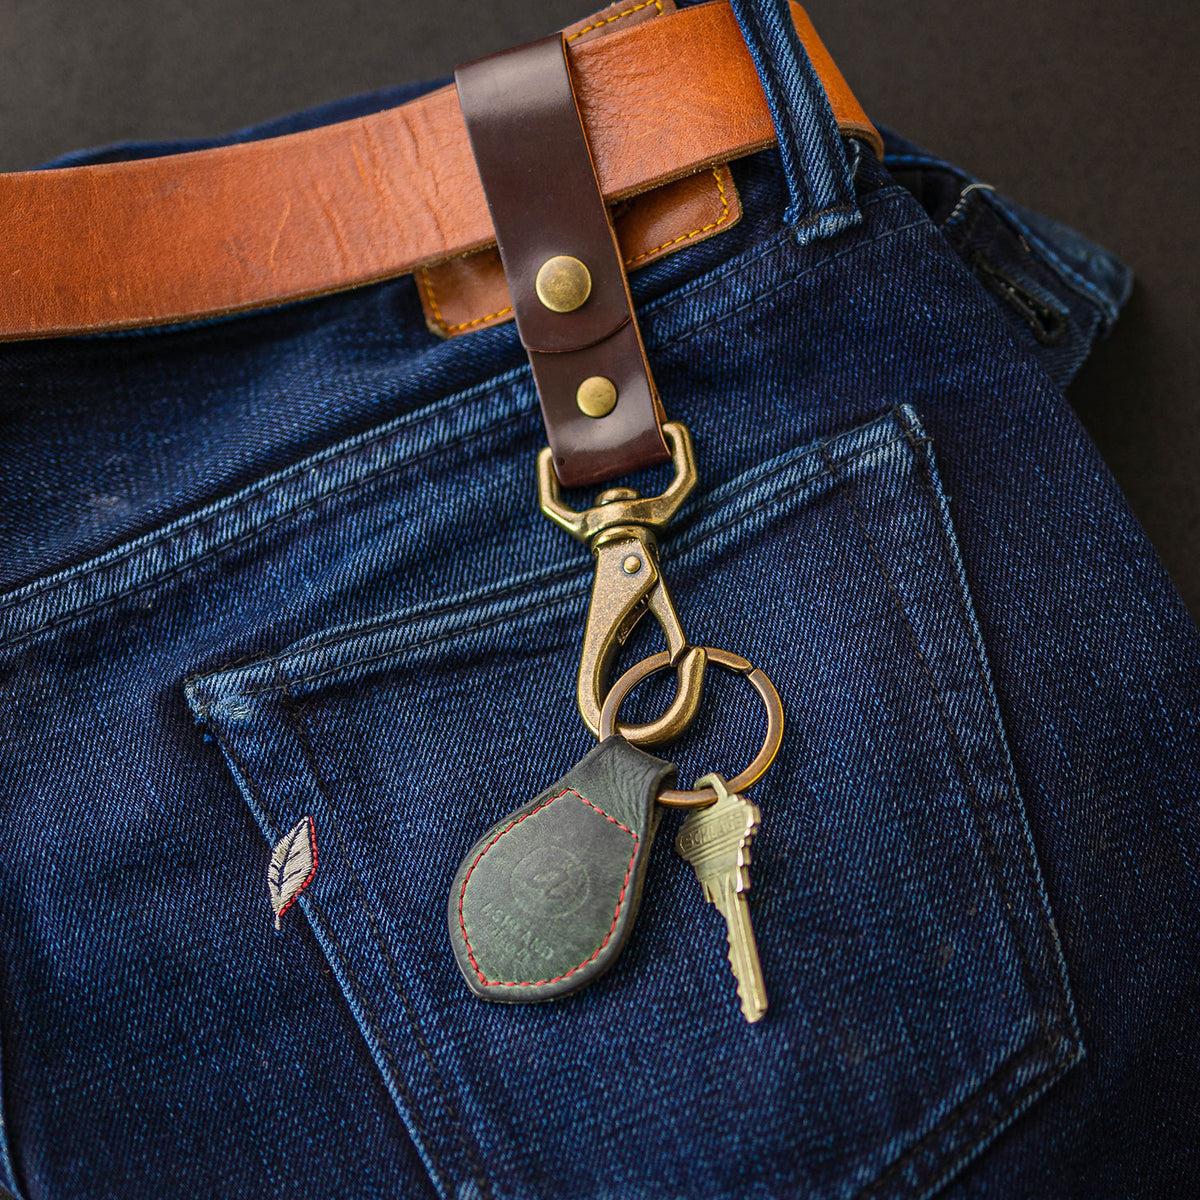 Denim Belt Loop Purse From Recycled Jeans Key Ring -  UK